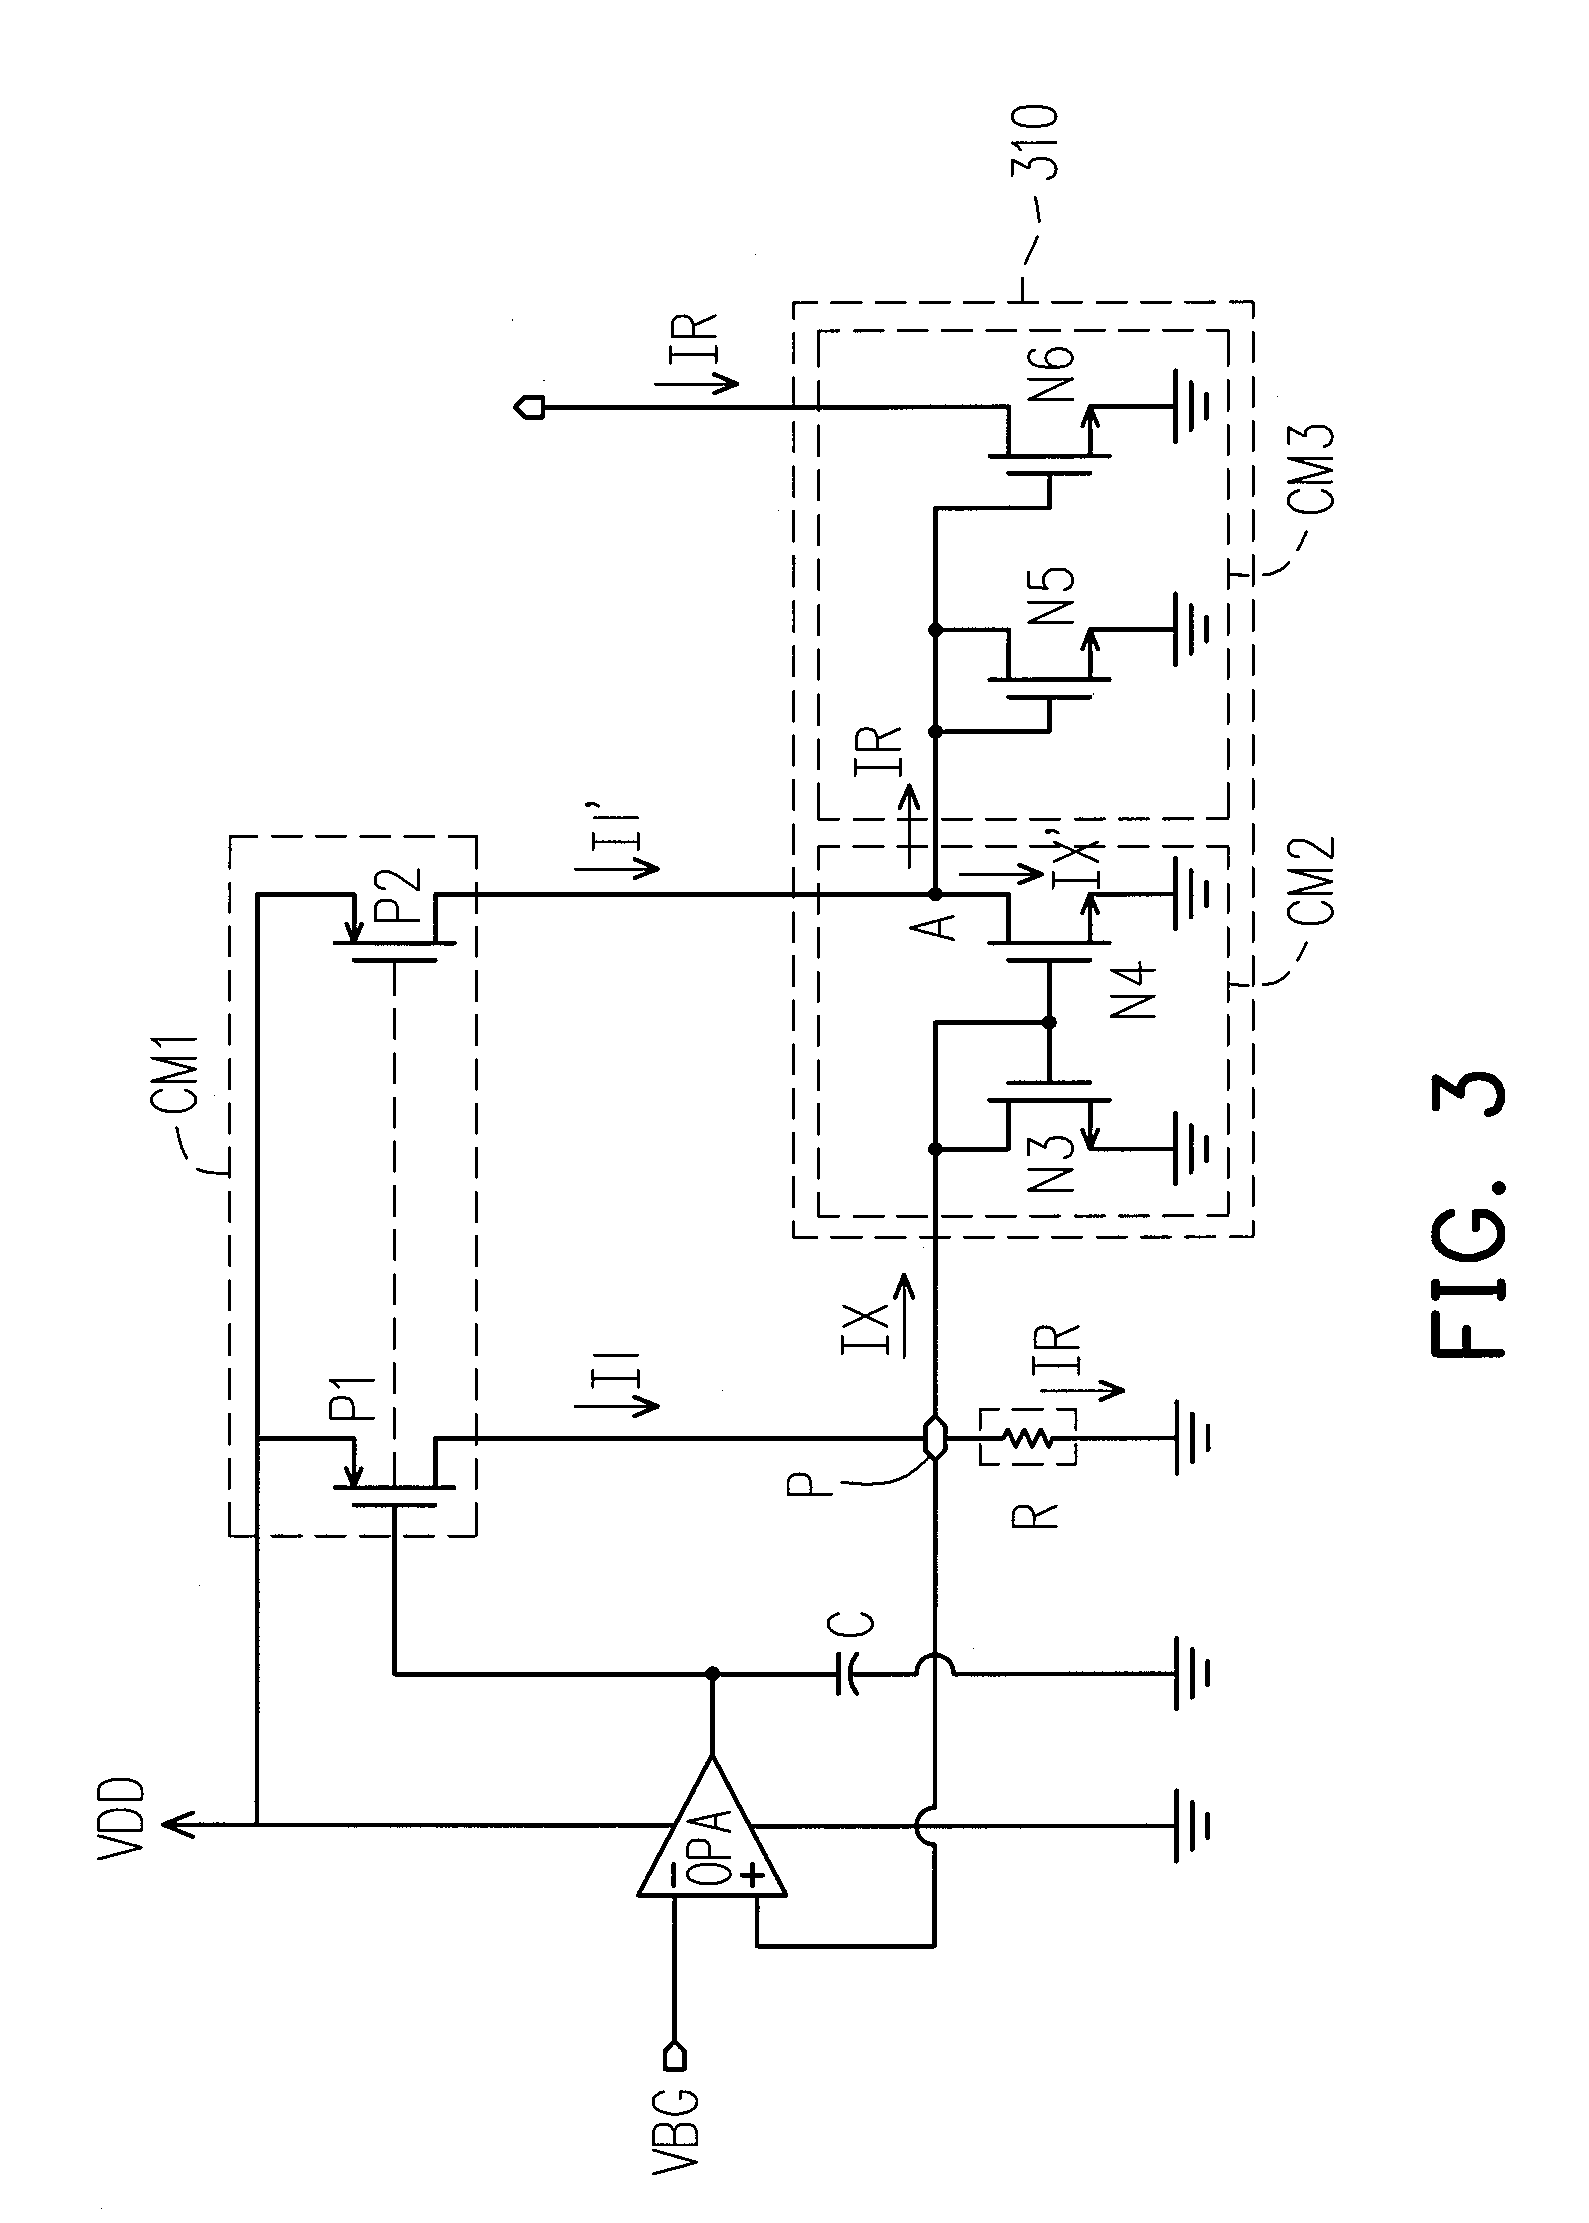 Reference current generator circuit for low-voltage applications